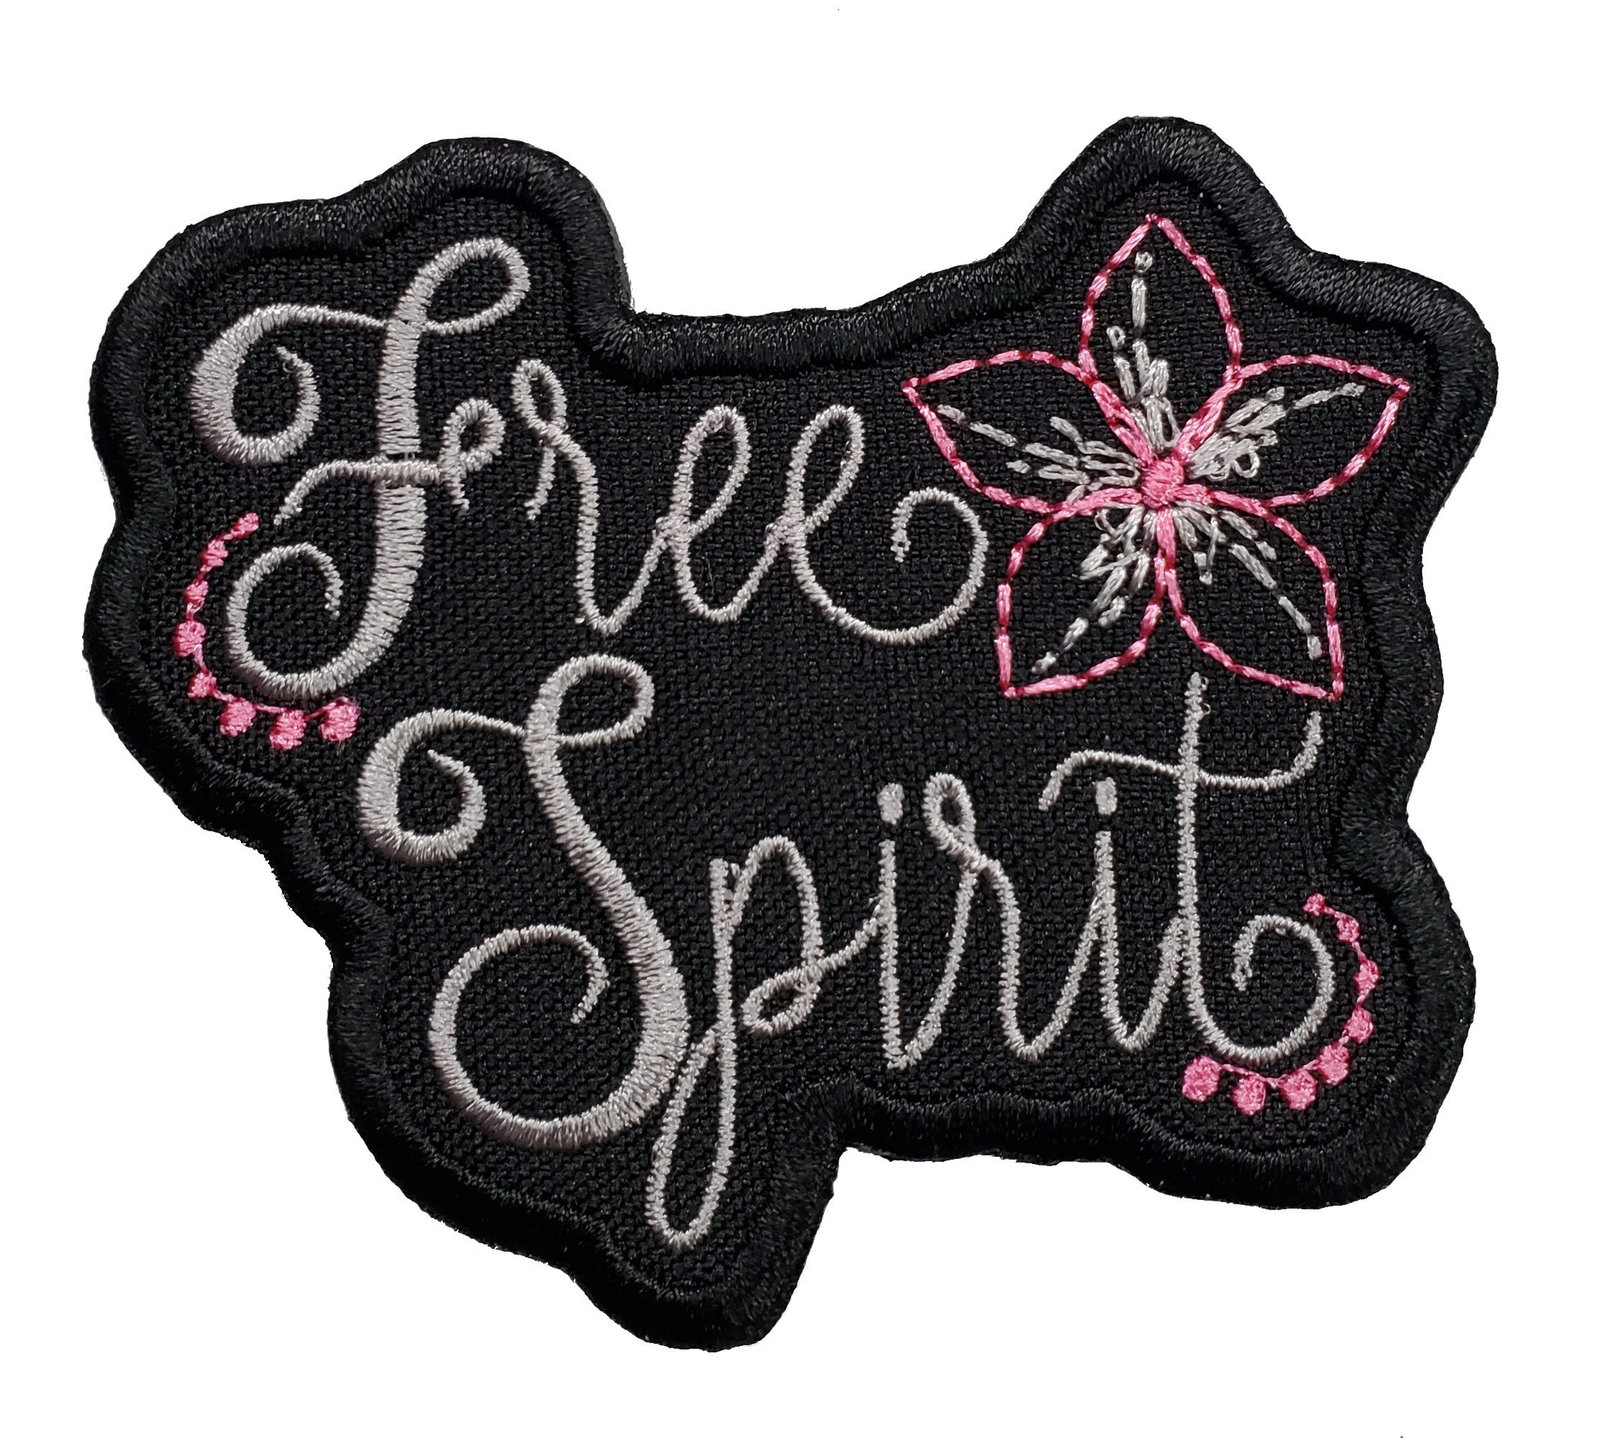 Free Spirit Silver Text Embroidered Iron On Patch 3.3" x 2.75" Inspiration Hippi - $7.87